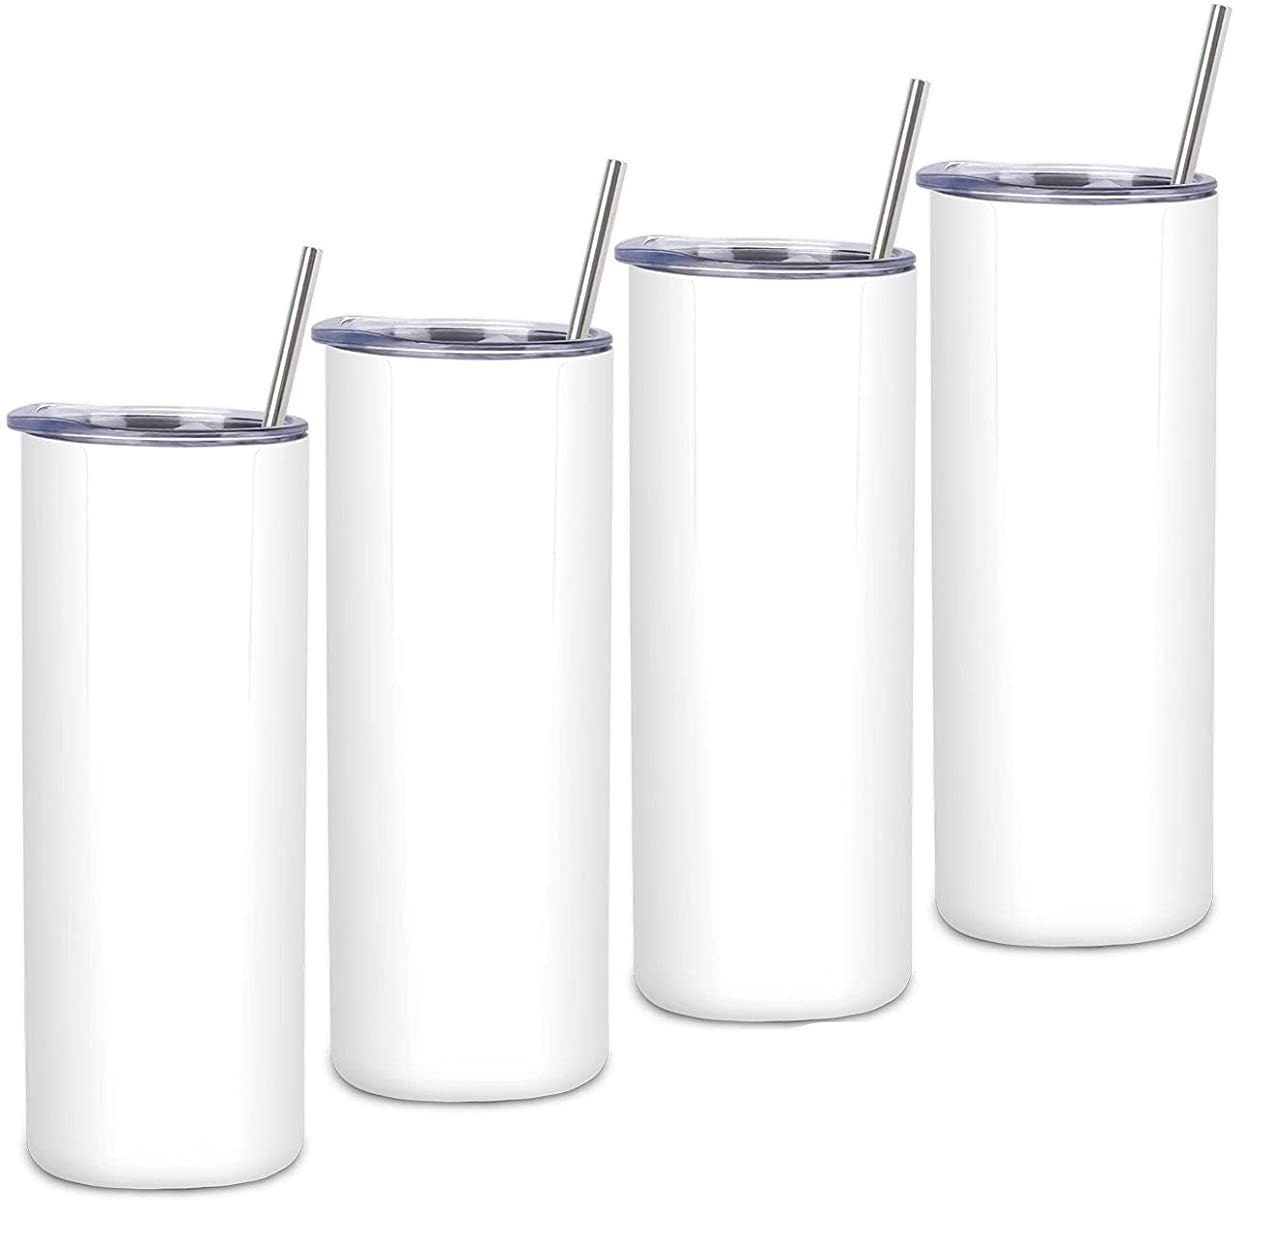 New Arrival, 20oz Skinny Tumbler w/ Metal Straw, Straight Tumbler For Sublimation, Double Wall Insulated w Polymer Coating for Heat Transfer